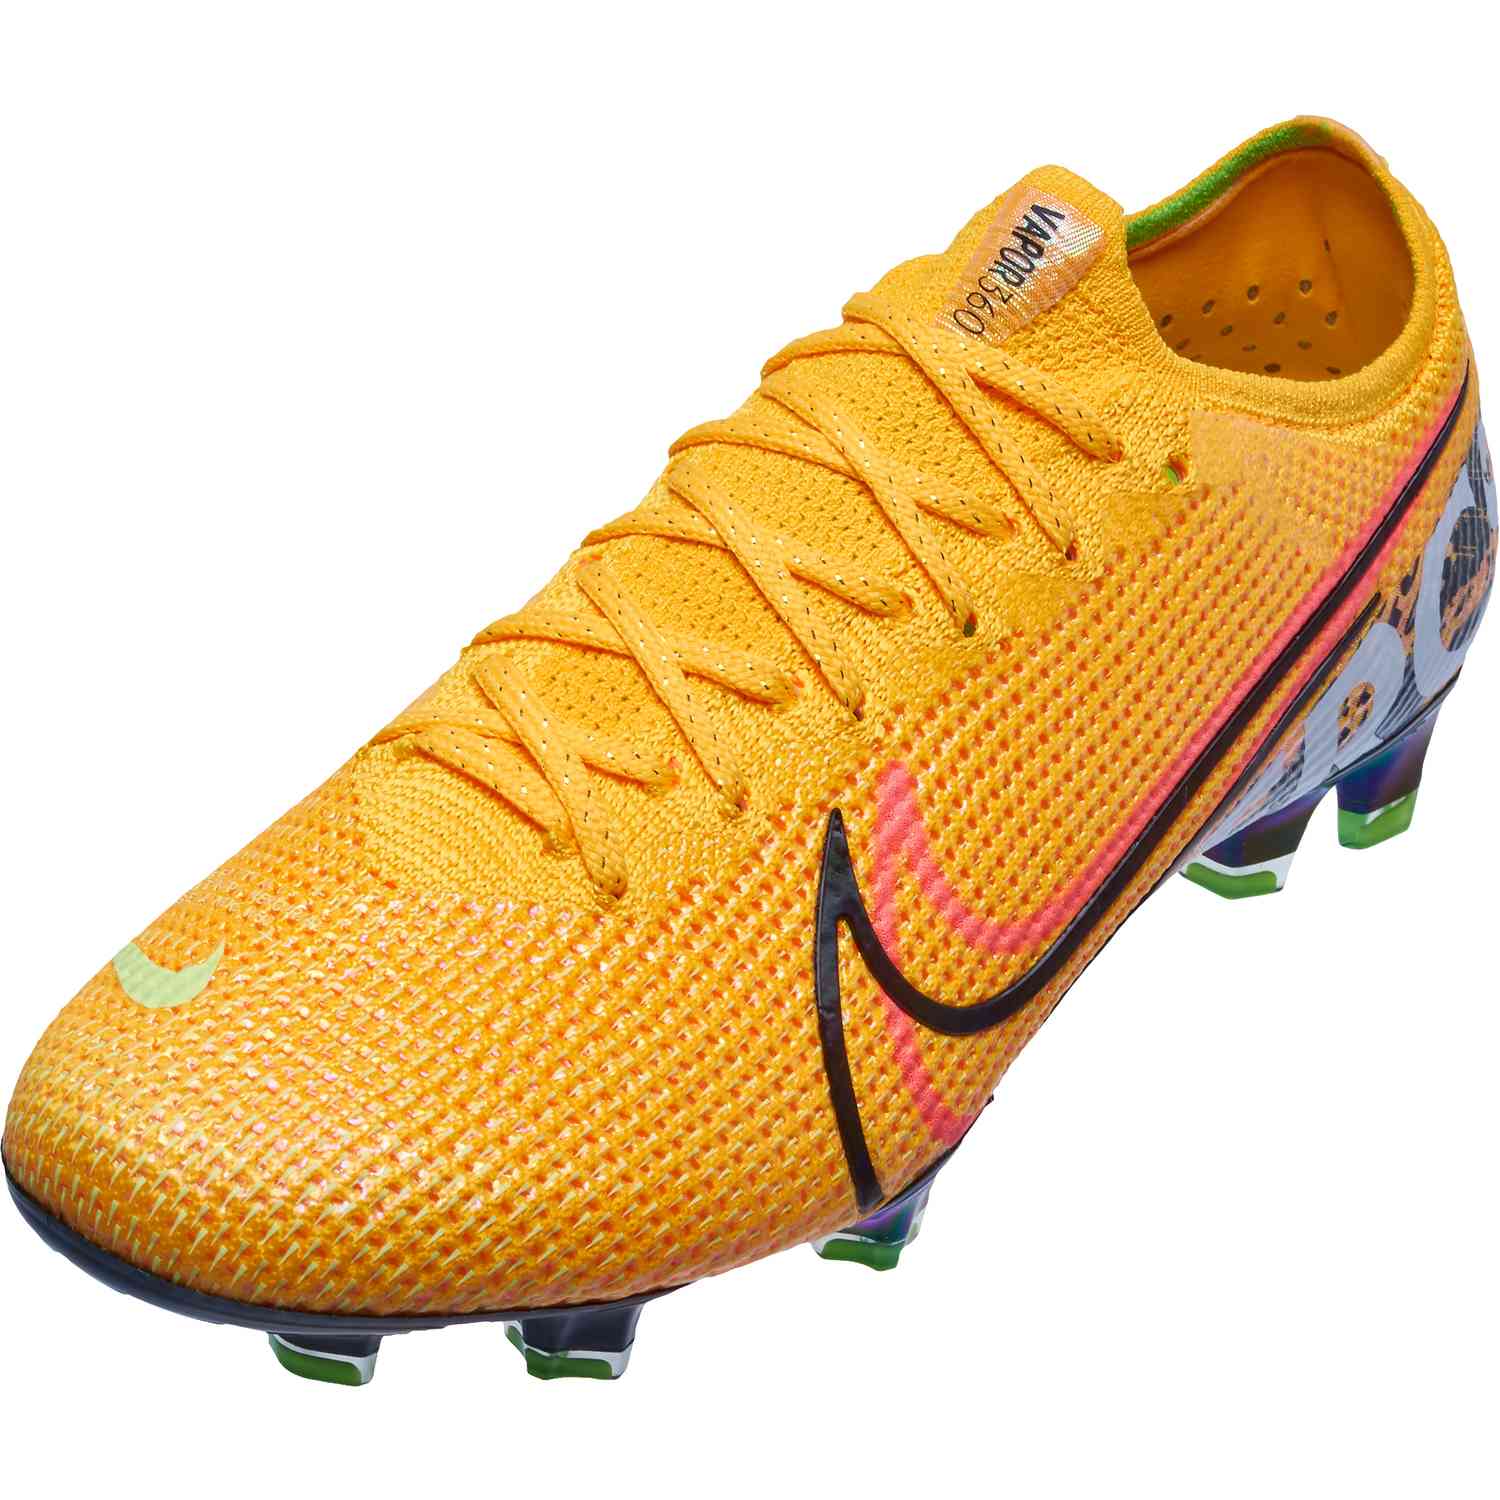 Nike Mercurial Vapor 13 Elite FG Welcome to Strictly